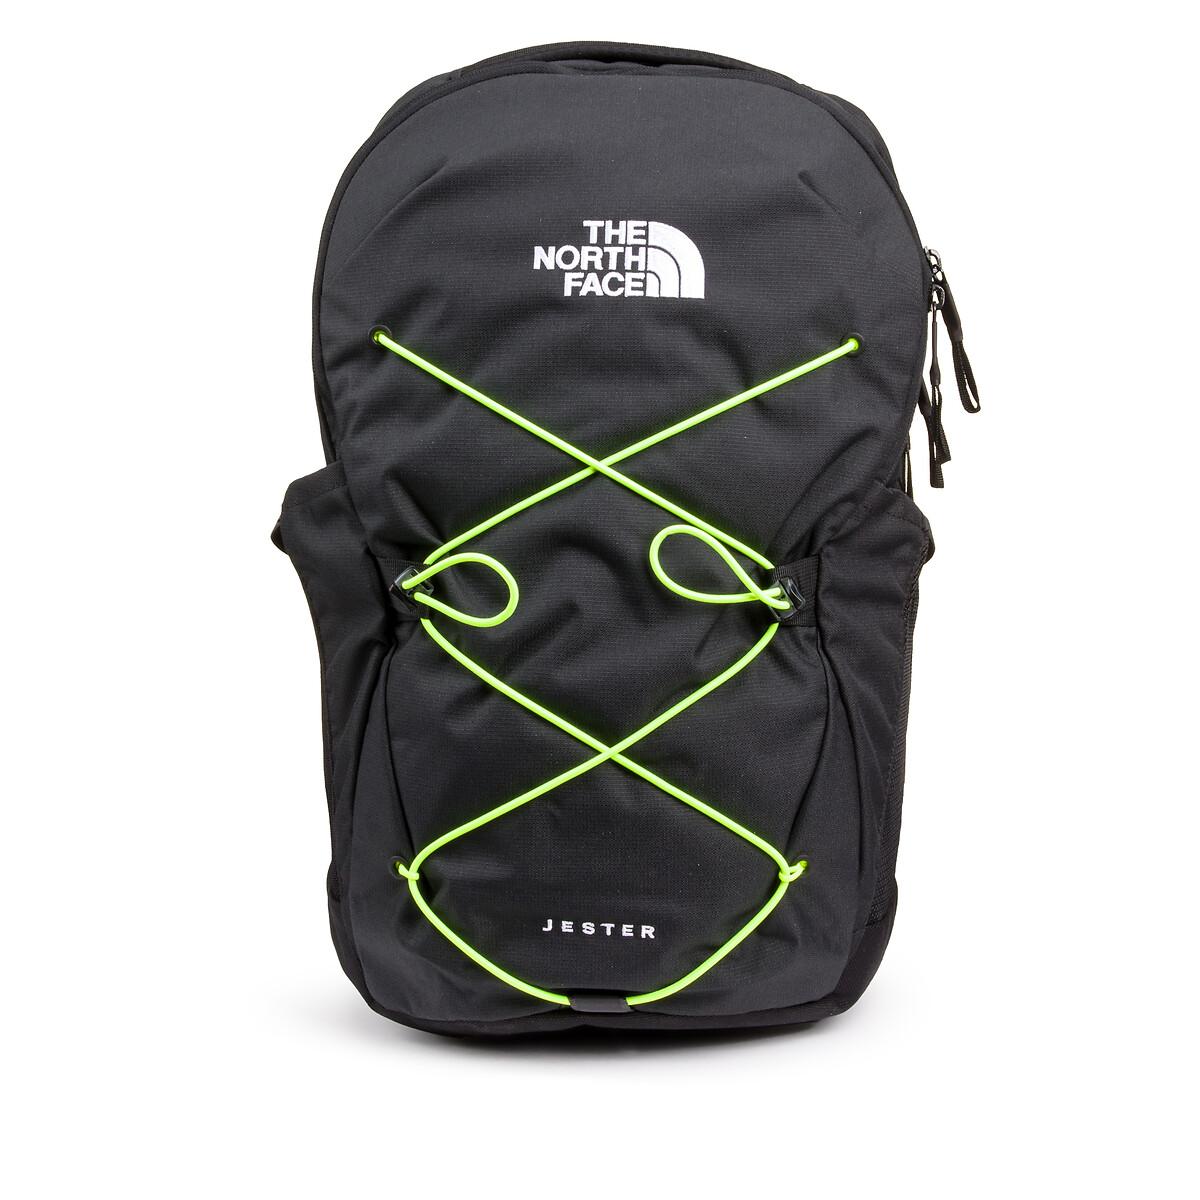 The North Face Jester Backpack |